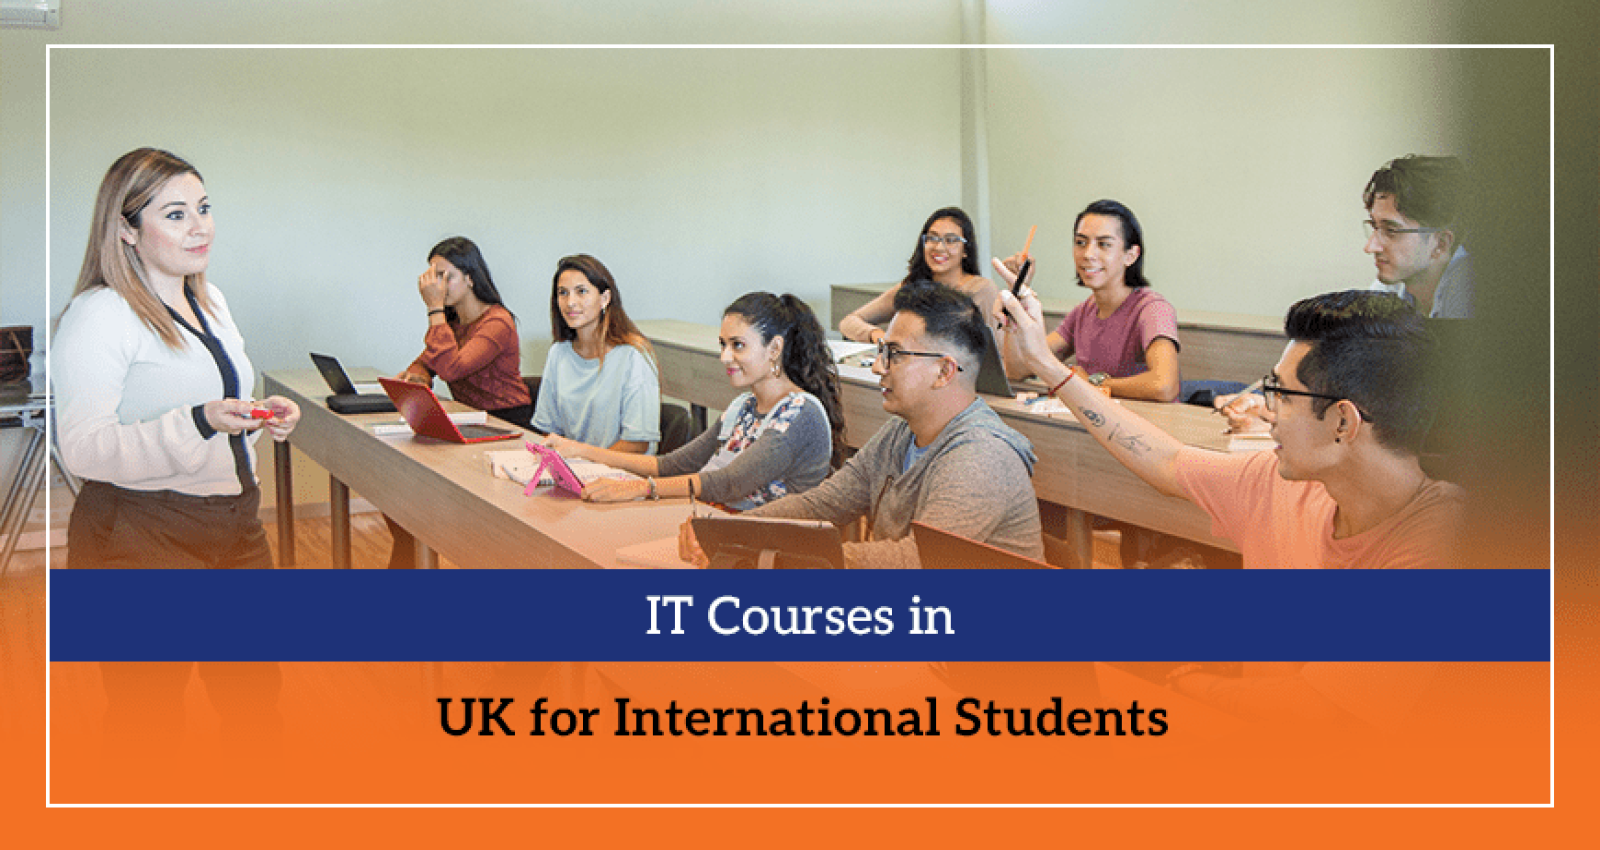 IT Courses in UK for International Students